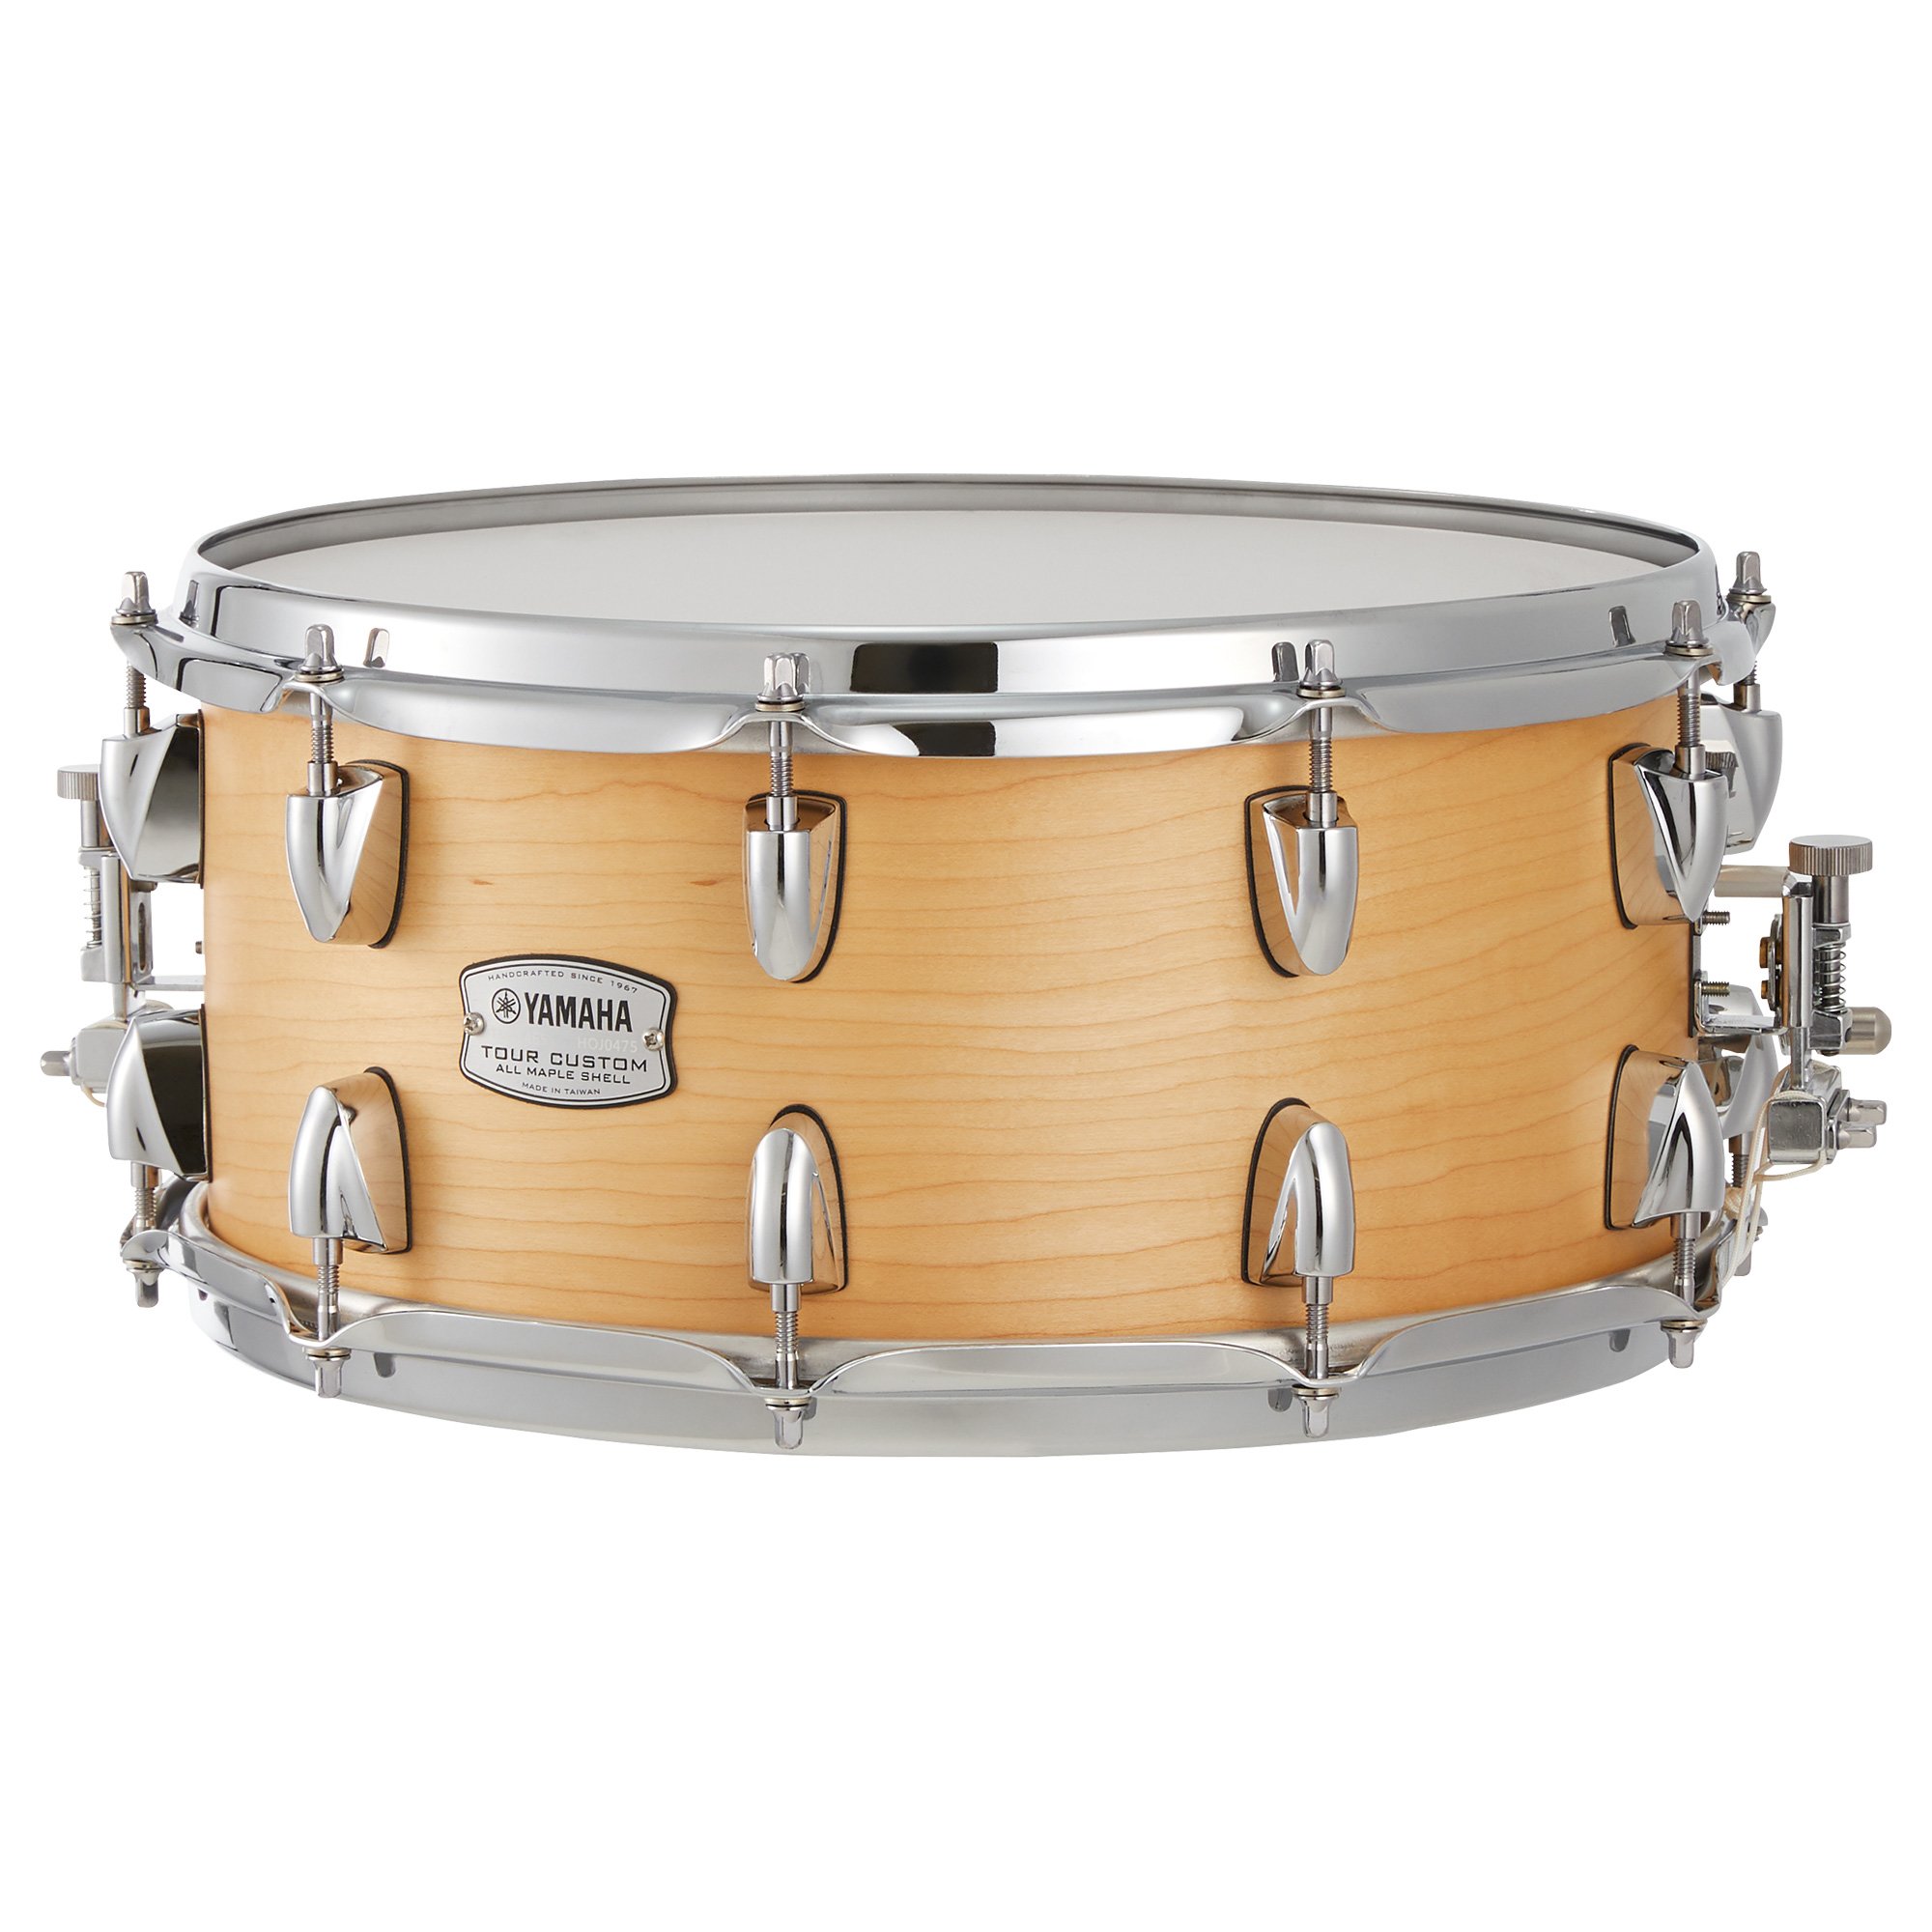 Tour Custom Snare Drums (TMS1465)